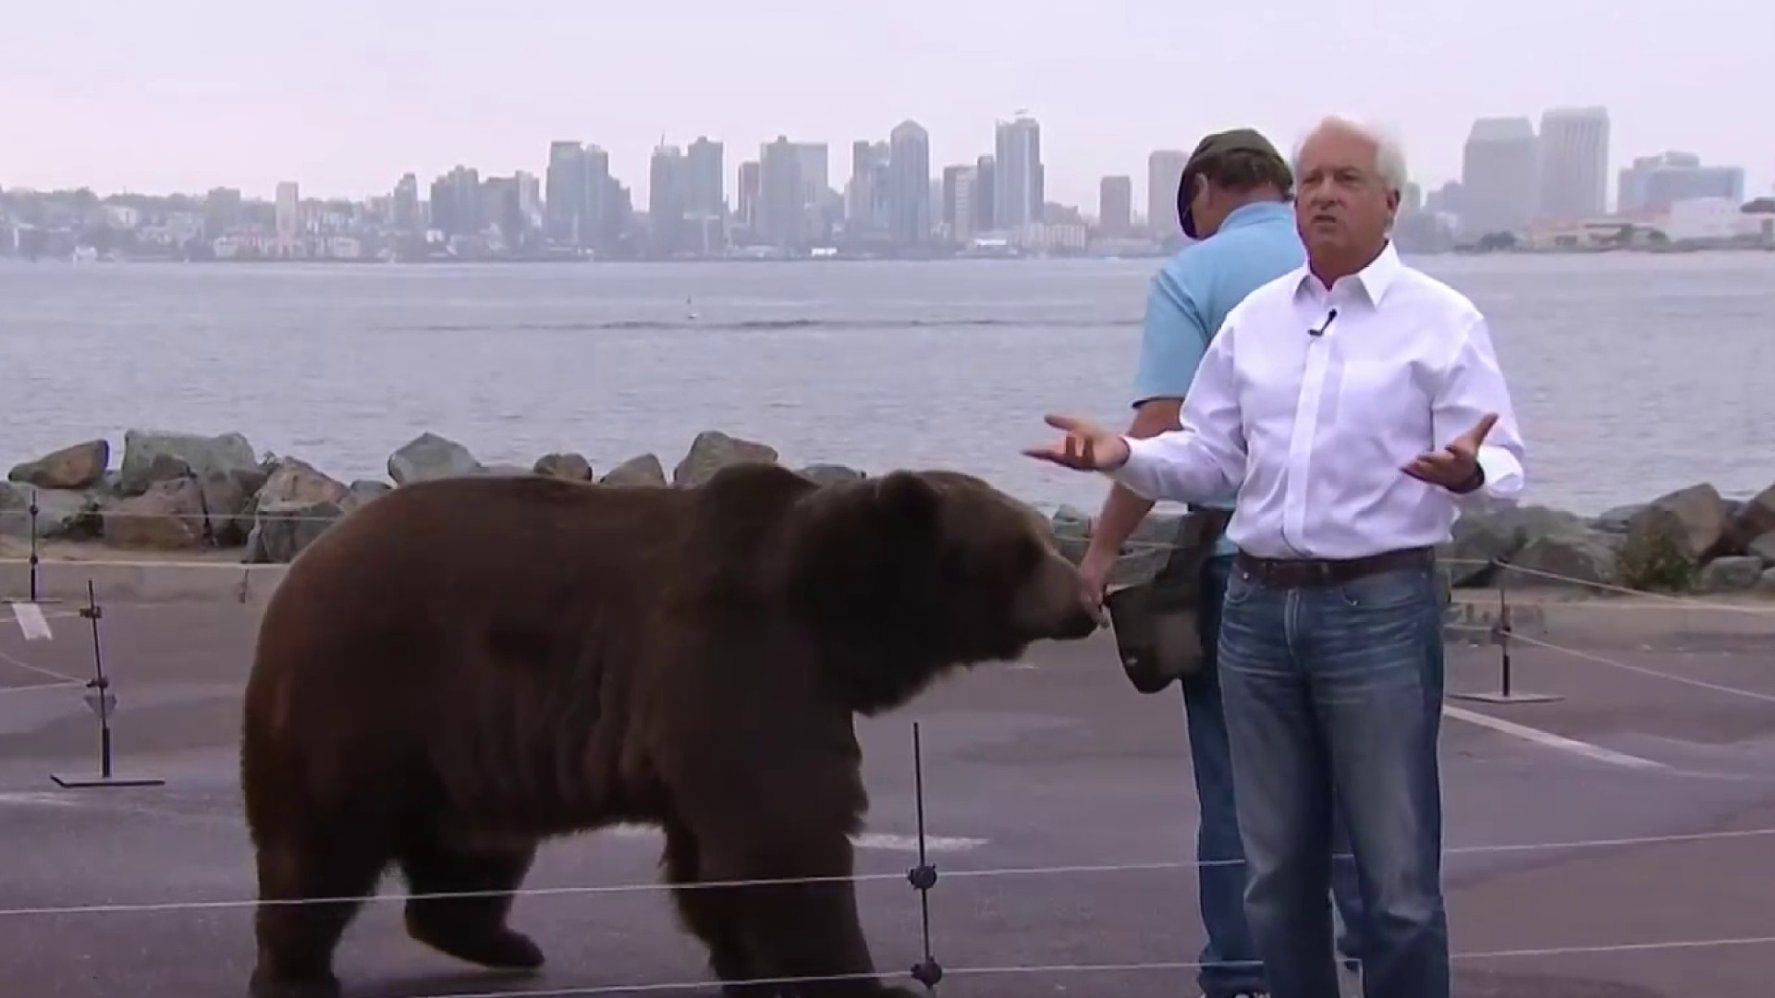 California Governor Campaign Being Investigated For Bringing 1K-Pound Bear to San Diego